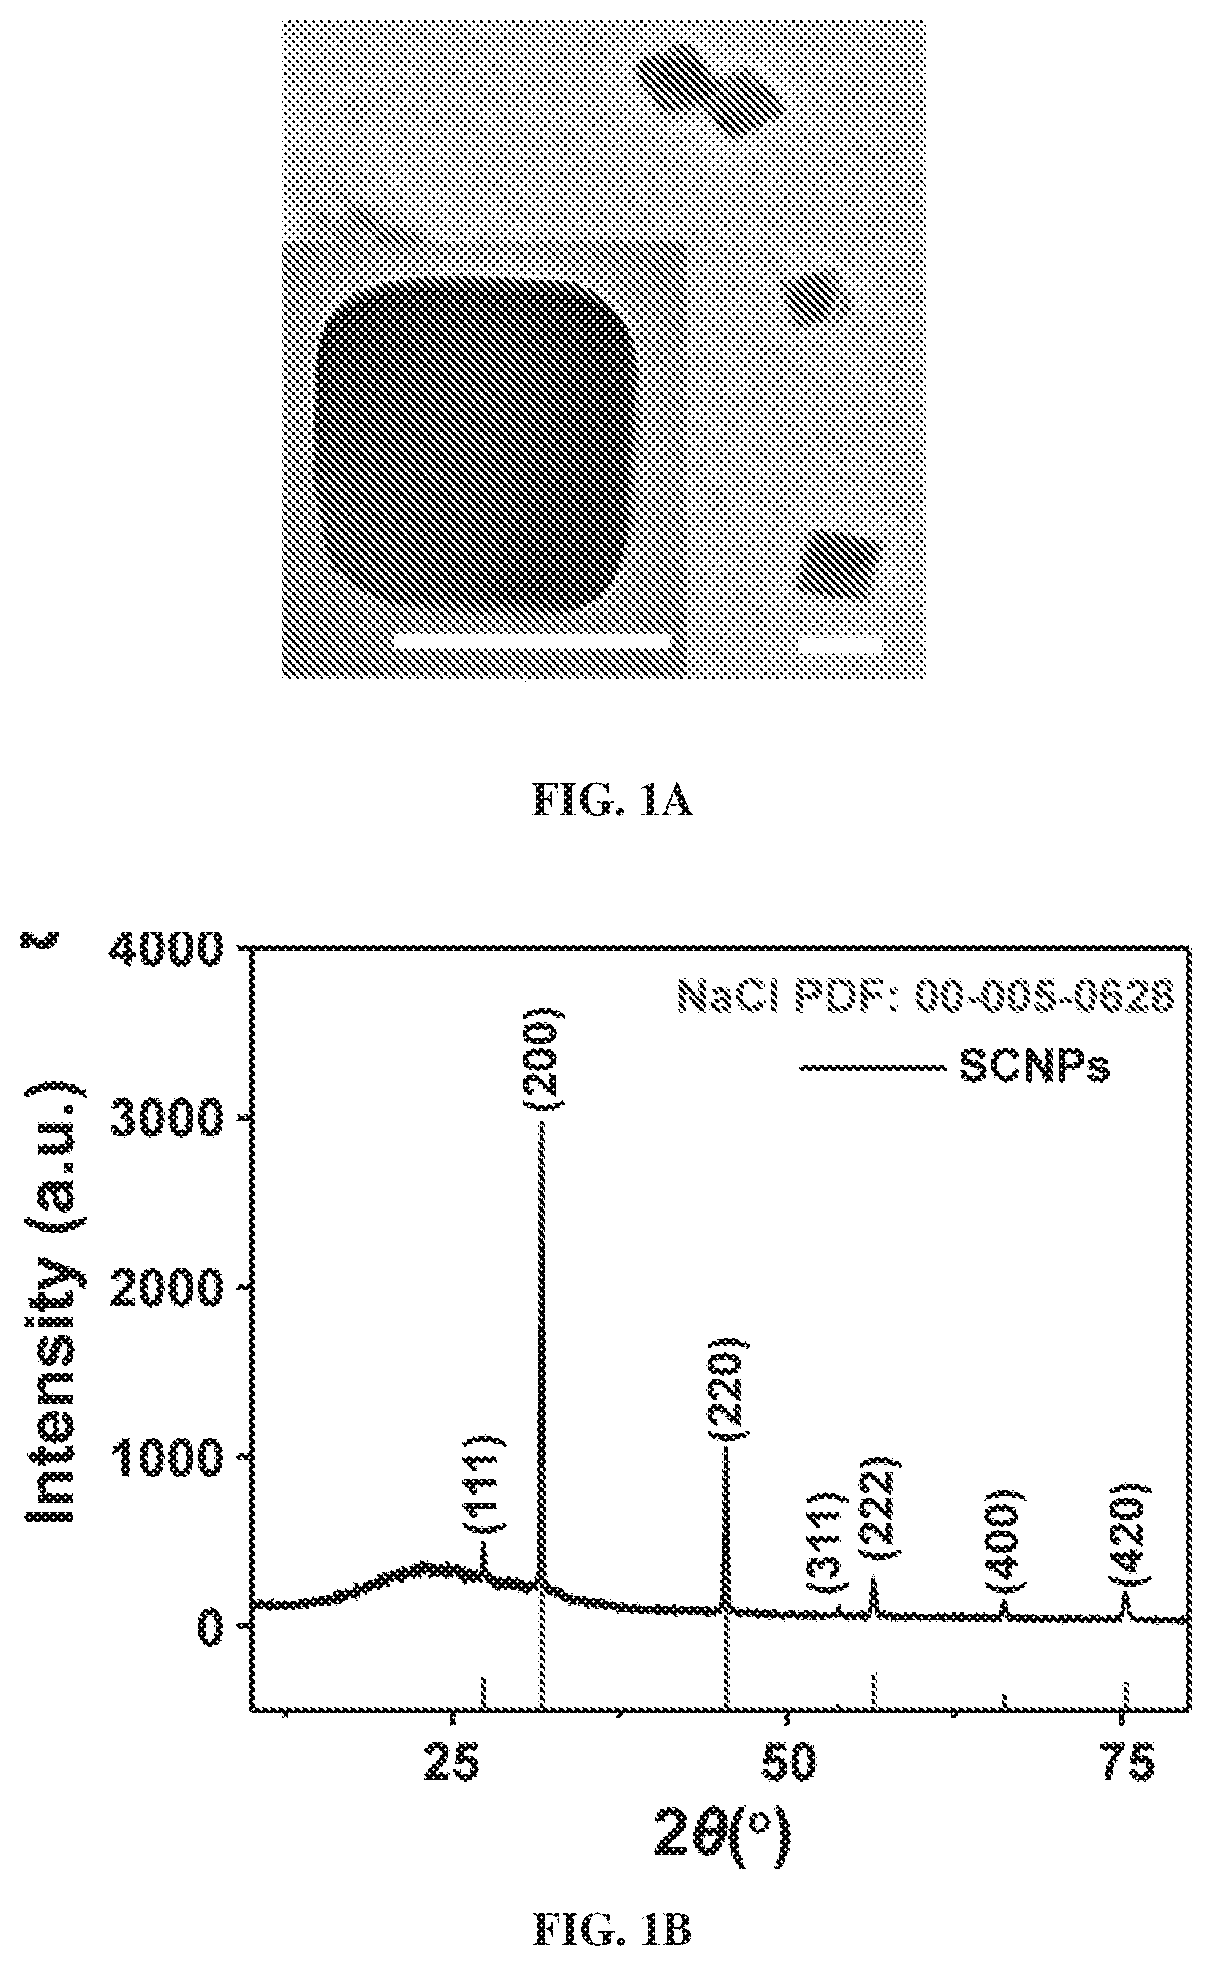 Salt nanoparticles and compositions and methods of use thereof